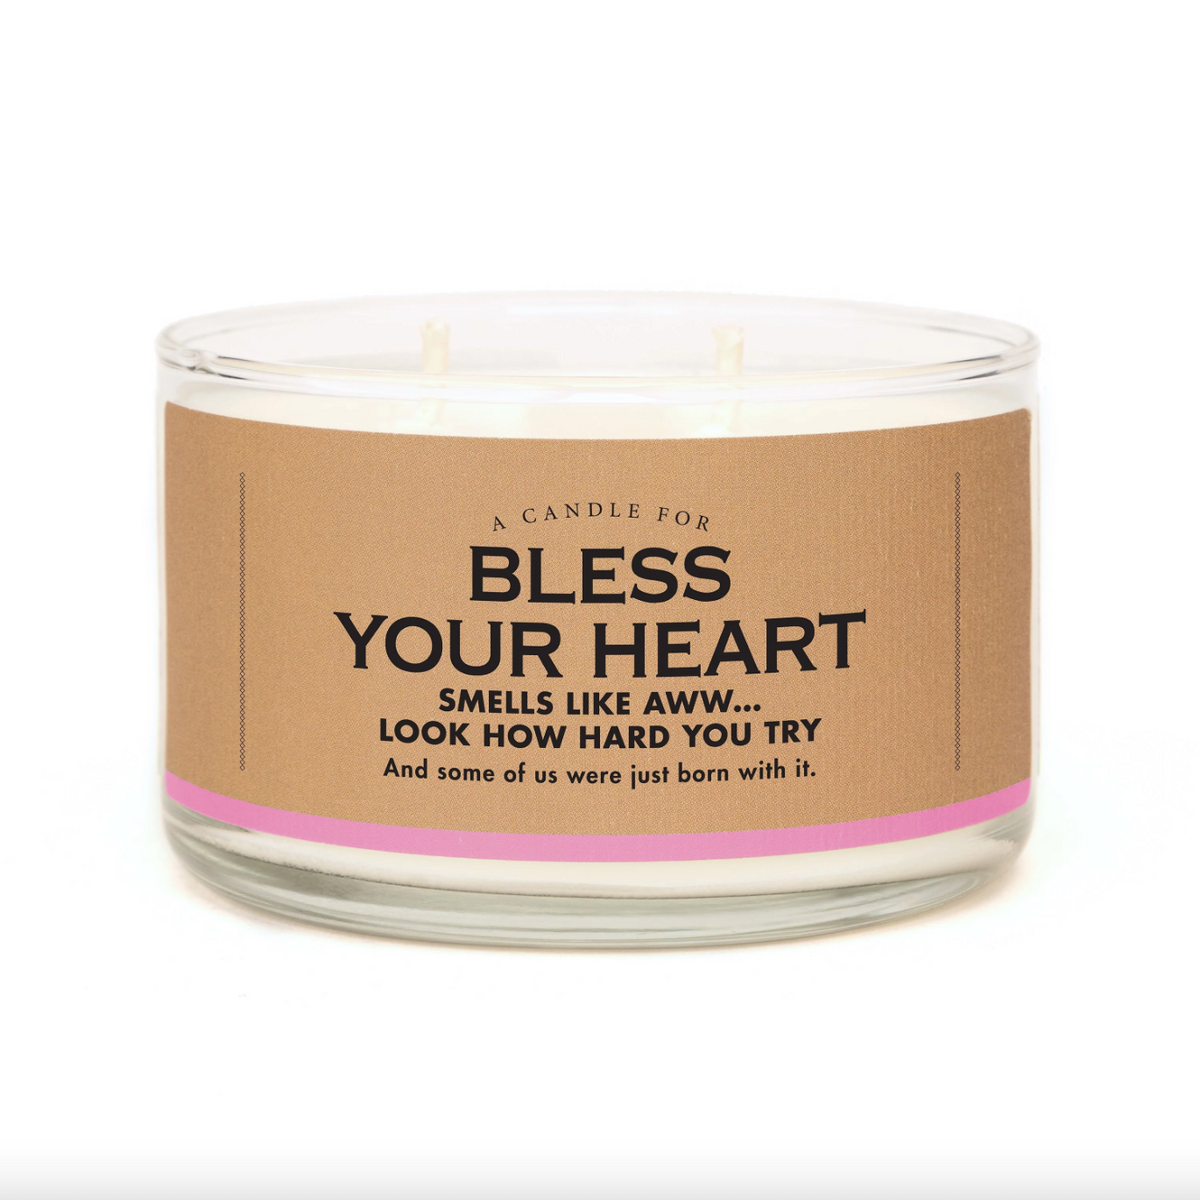 A Candle for Bless Your Heart - Heart of the Home LV